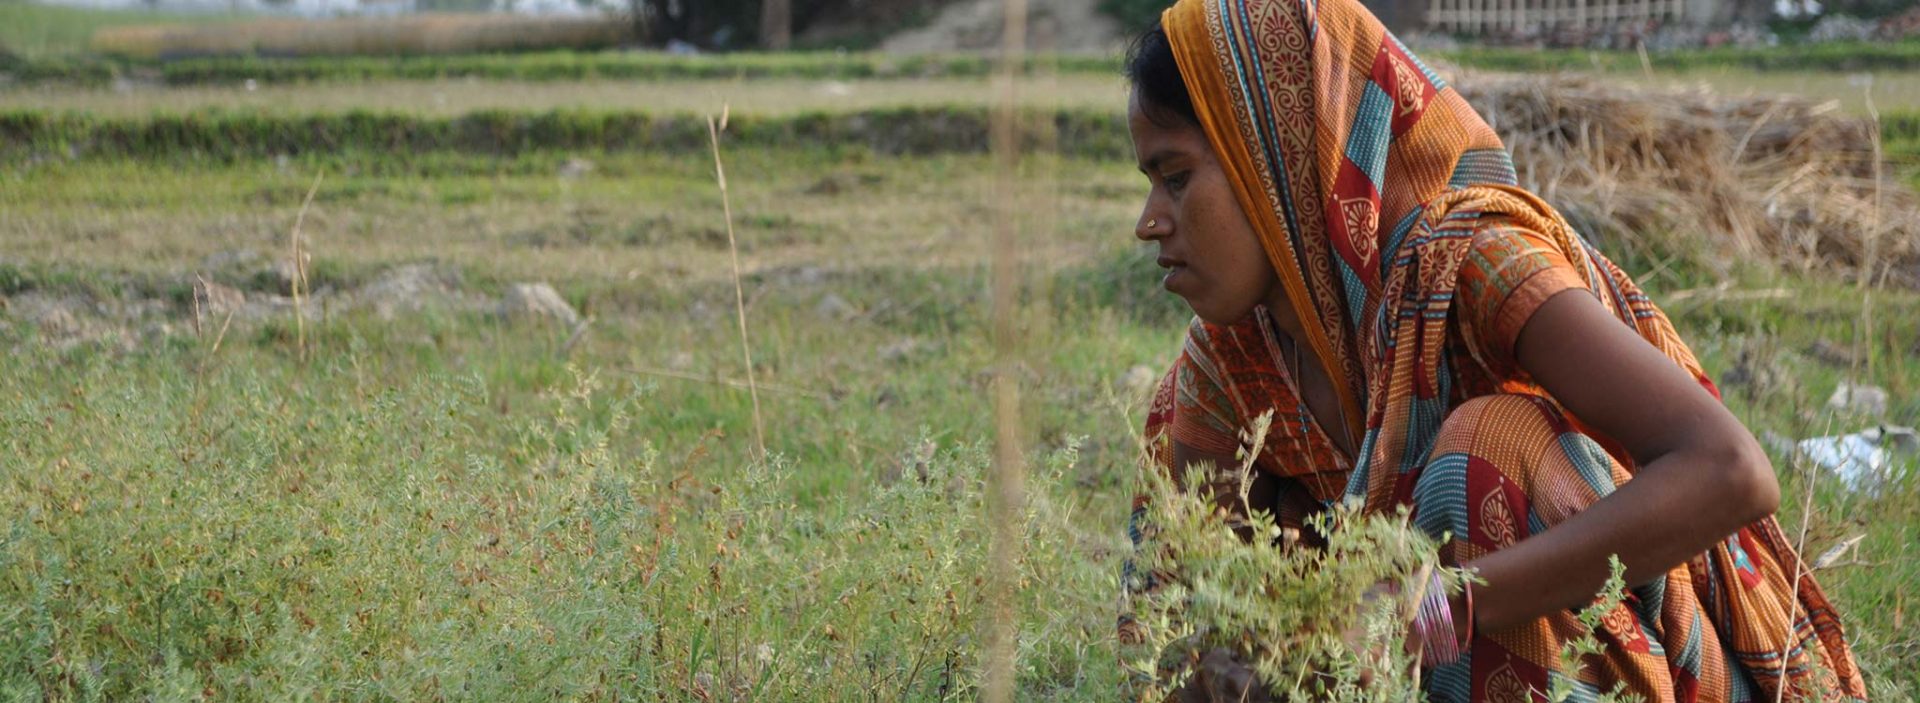 A woman works in a field near an Action Against Hunger project in Nepal.